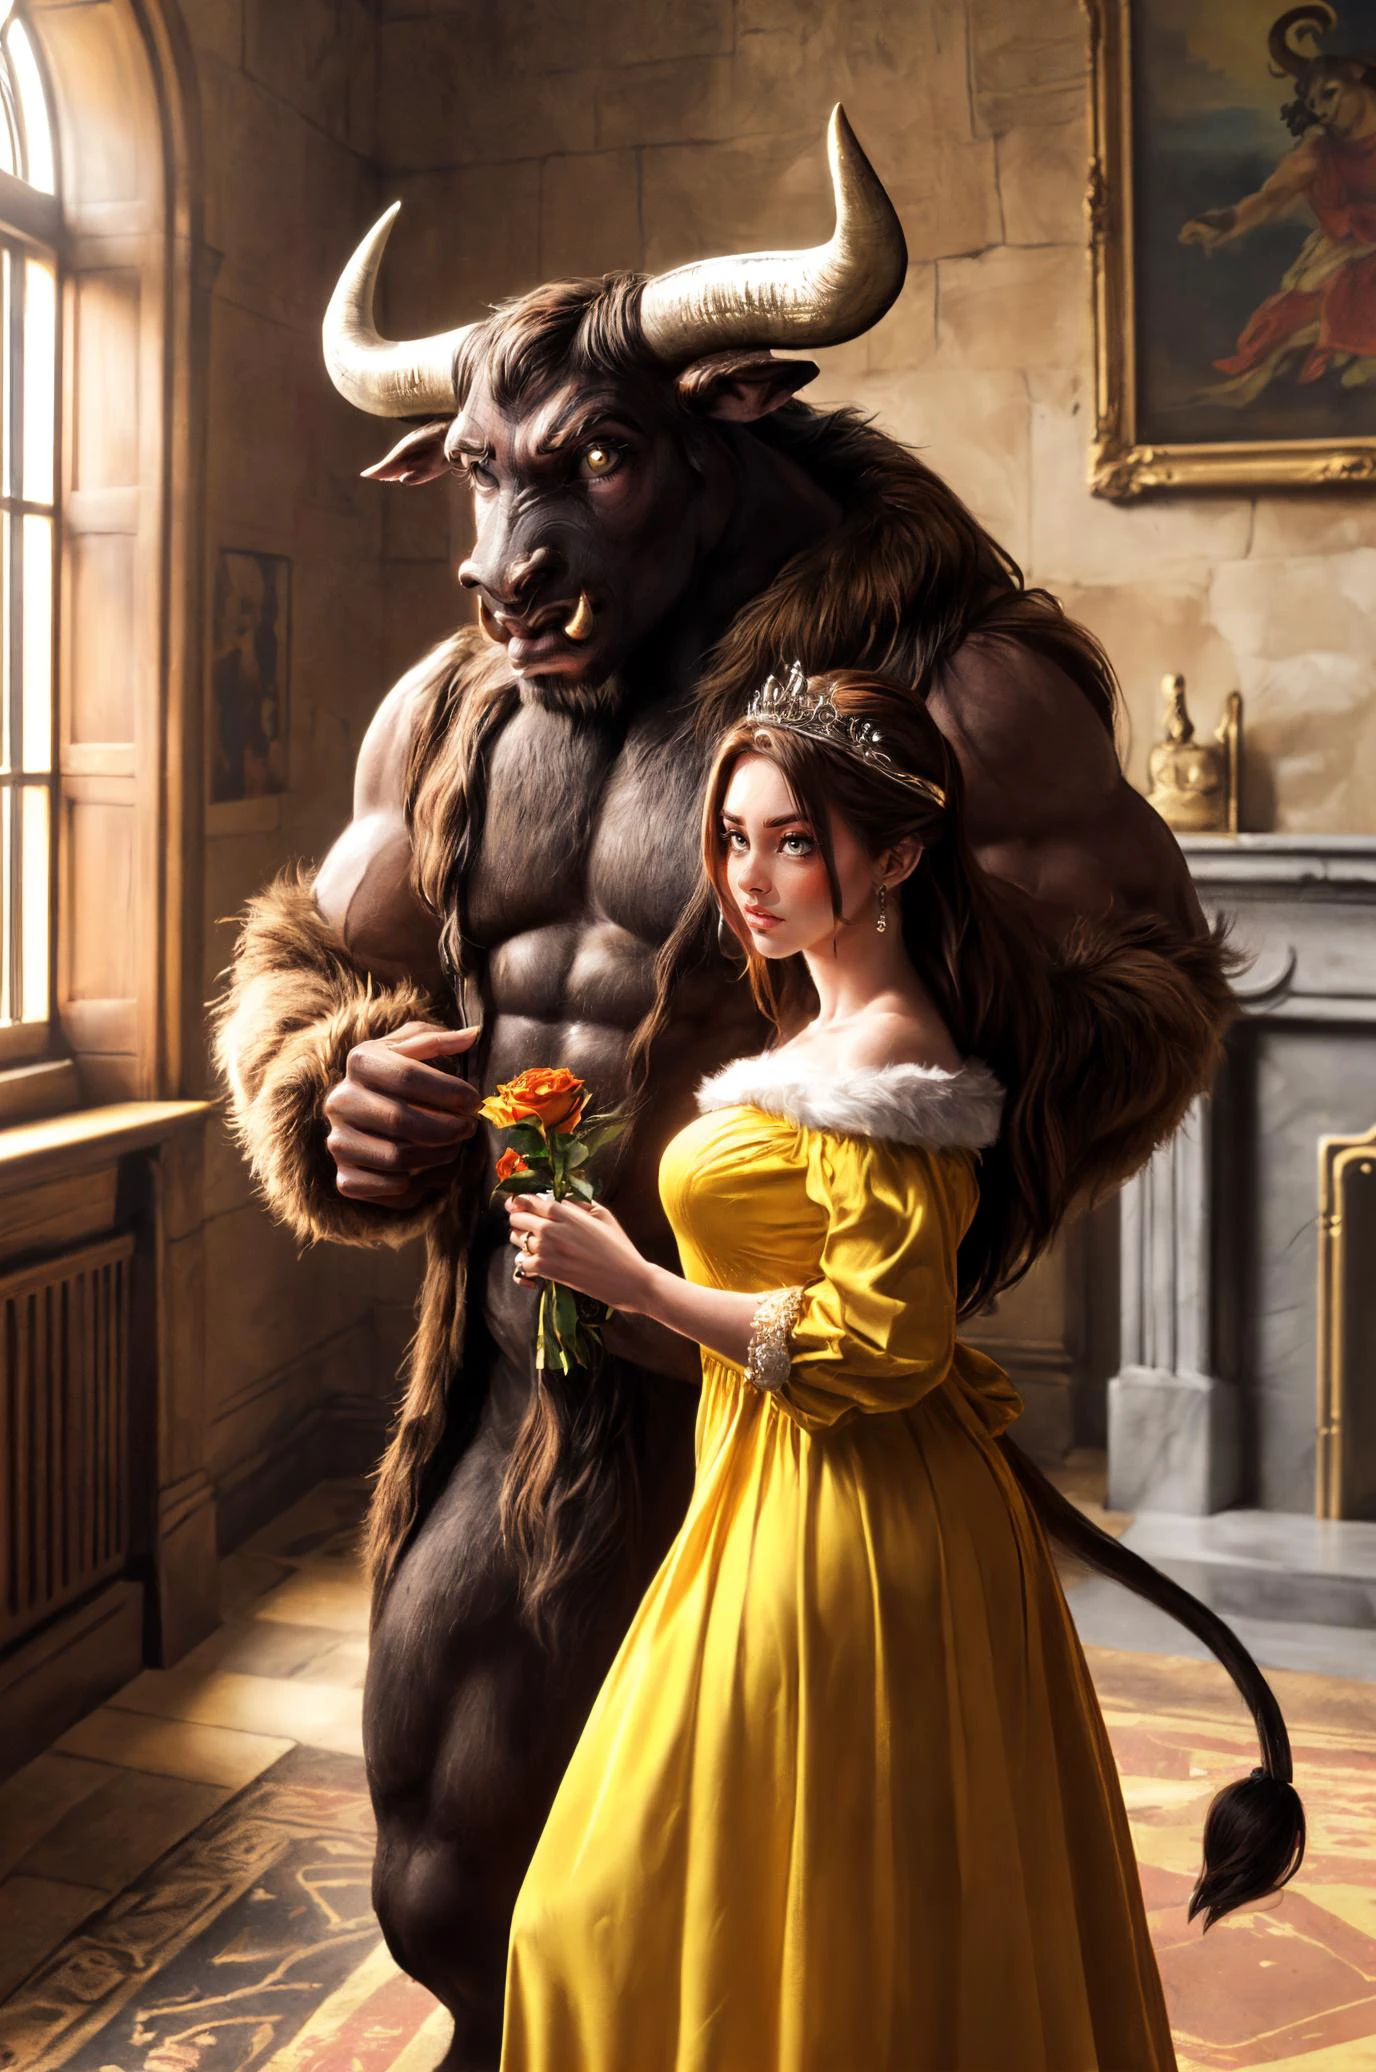 1girl, 1men, couple, belle \(disney\), (yellow dress:1.2), brown hair, hair bun, tiara, curvy, (holding a red rose:1.1), minotaur, orc, monster, nose ring, fur, muscular, size difference, height difference, glowing eyes, fat man, body hair, body fur, horror \(theme\), Beauty and the Beast, castle, ancient royal Victorian room, stone walls, Bright, medium long shot, Resolution: 4k, scenic perspective, best quality, masterpiece, high resolution, 